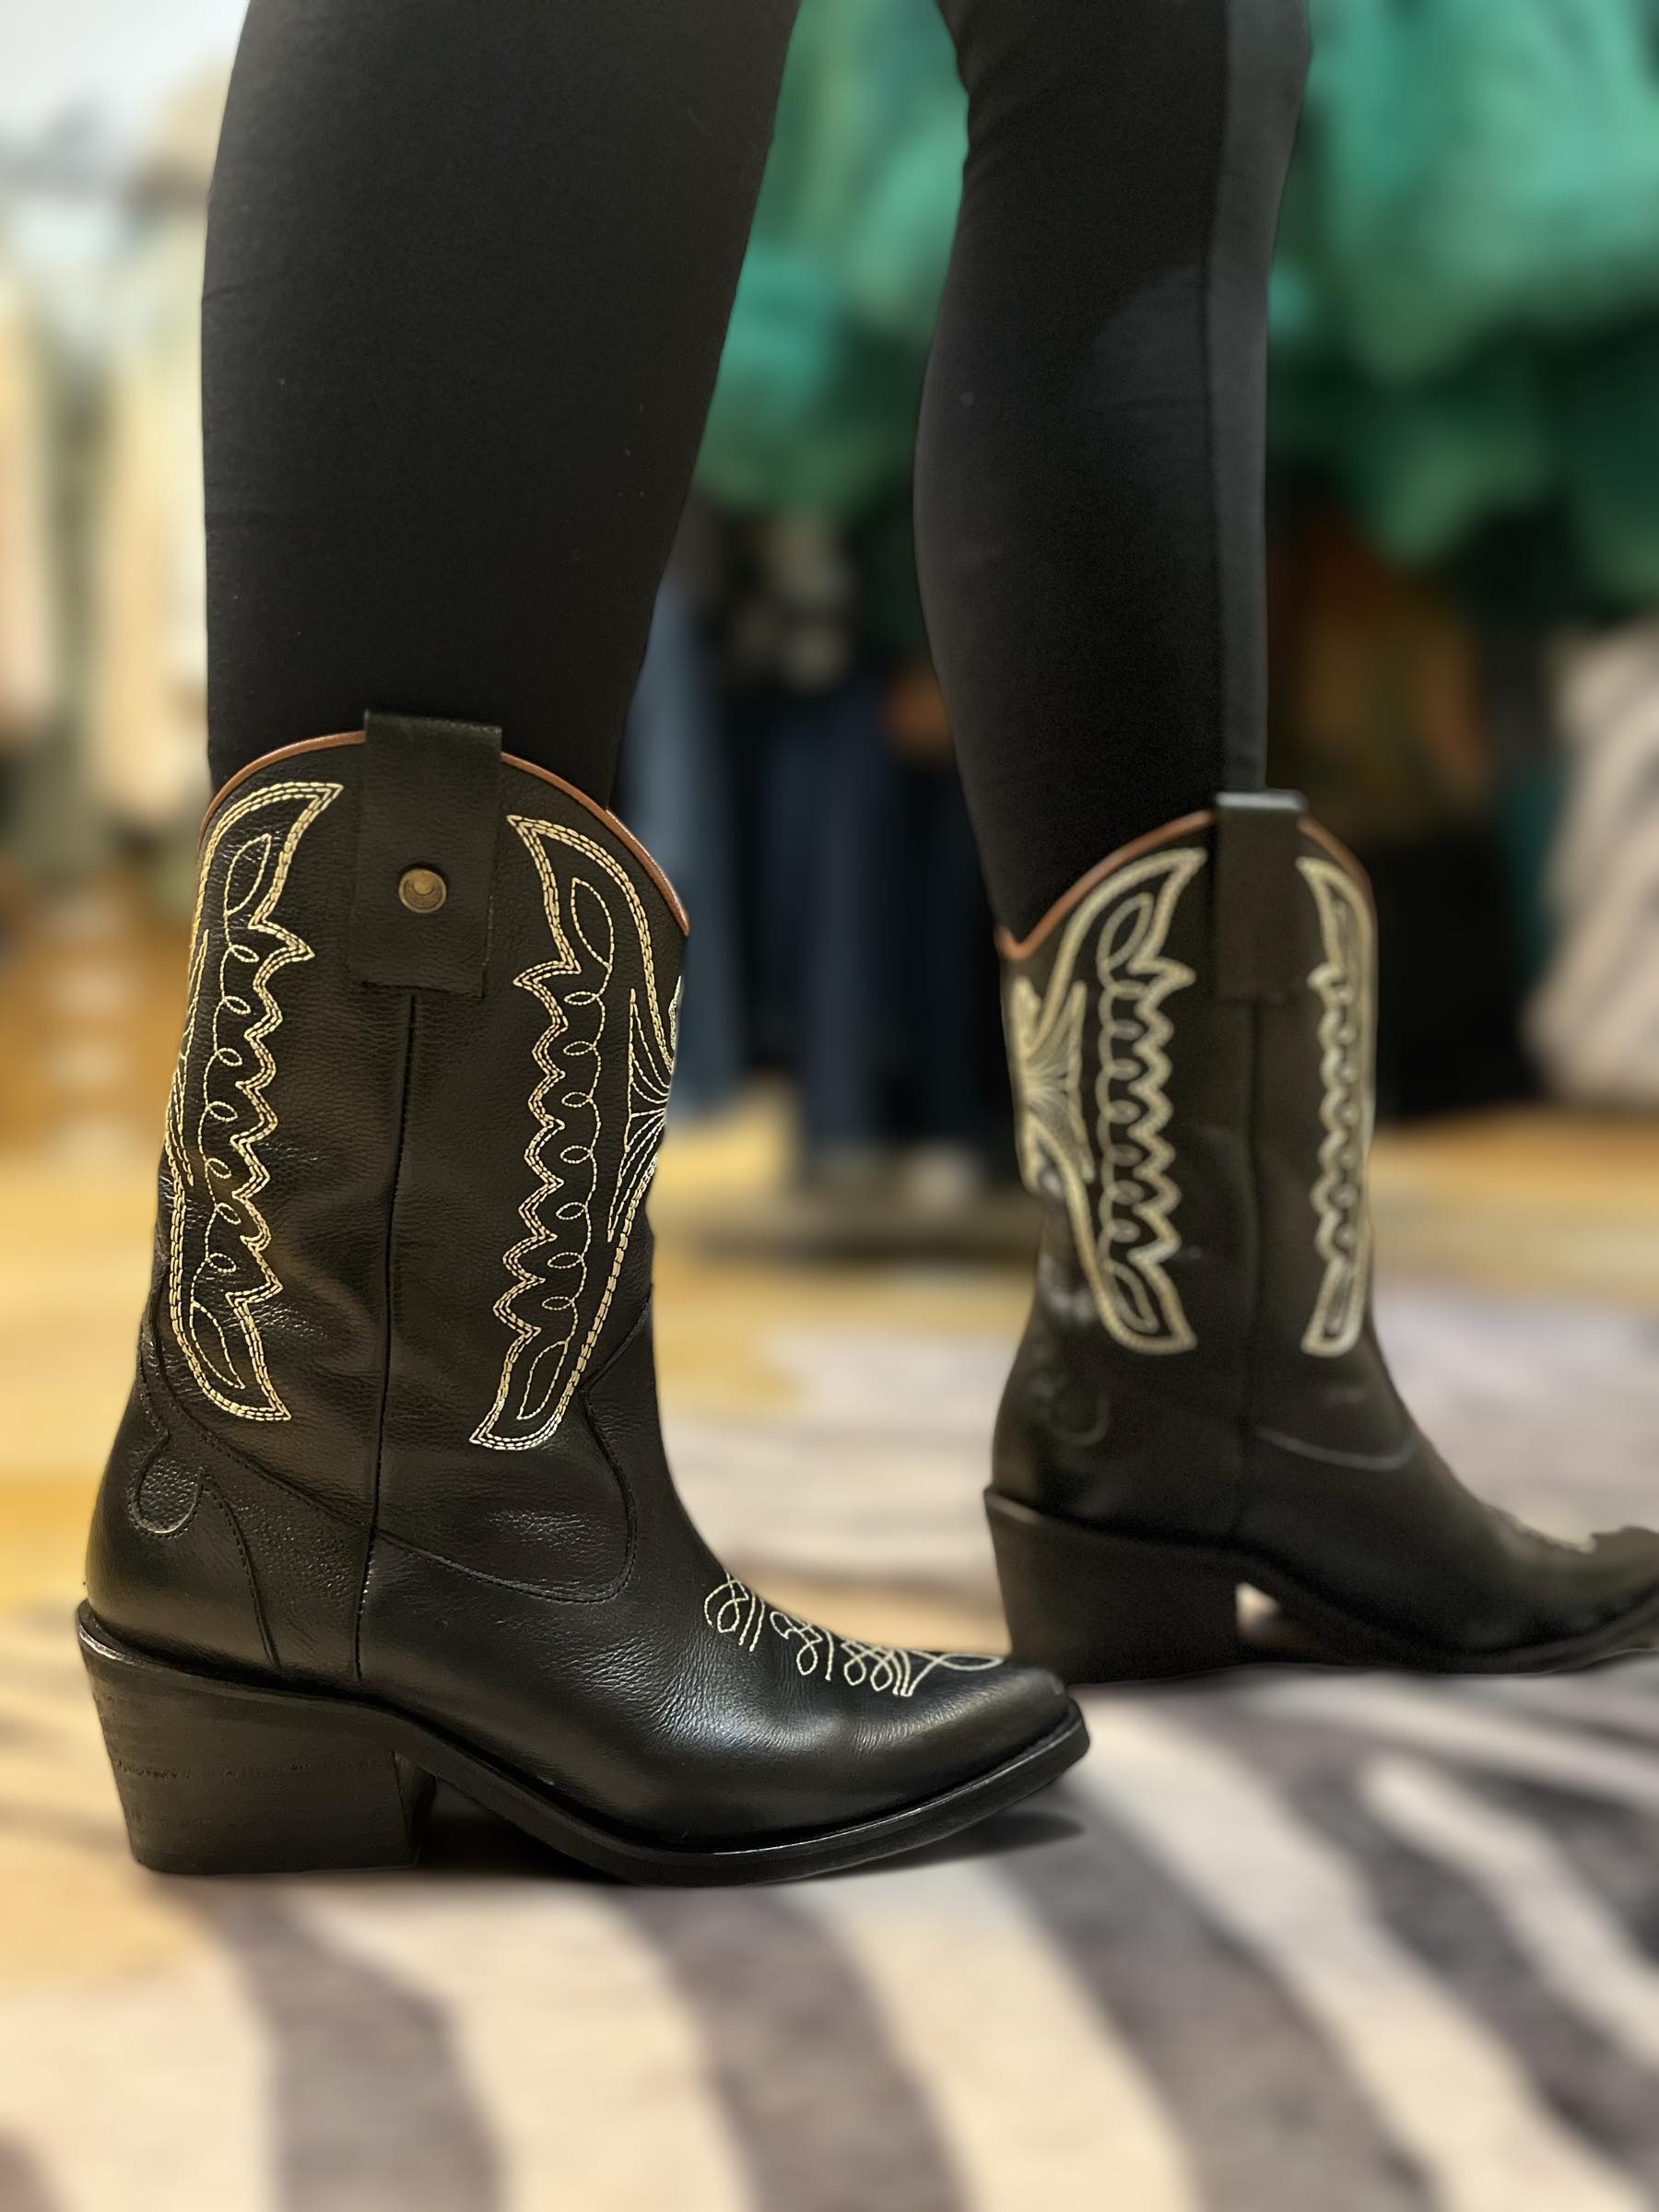 Black Unstoppable Cowboy Boots - Stivali New York - At The Boutique ...